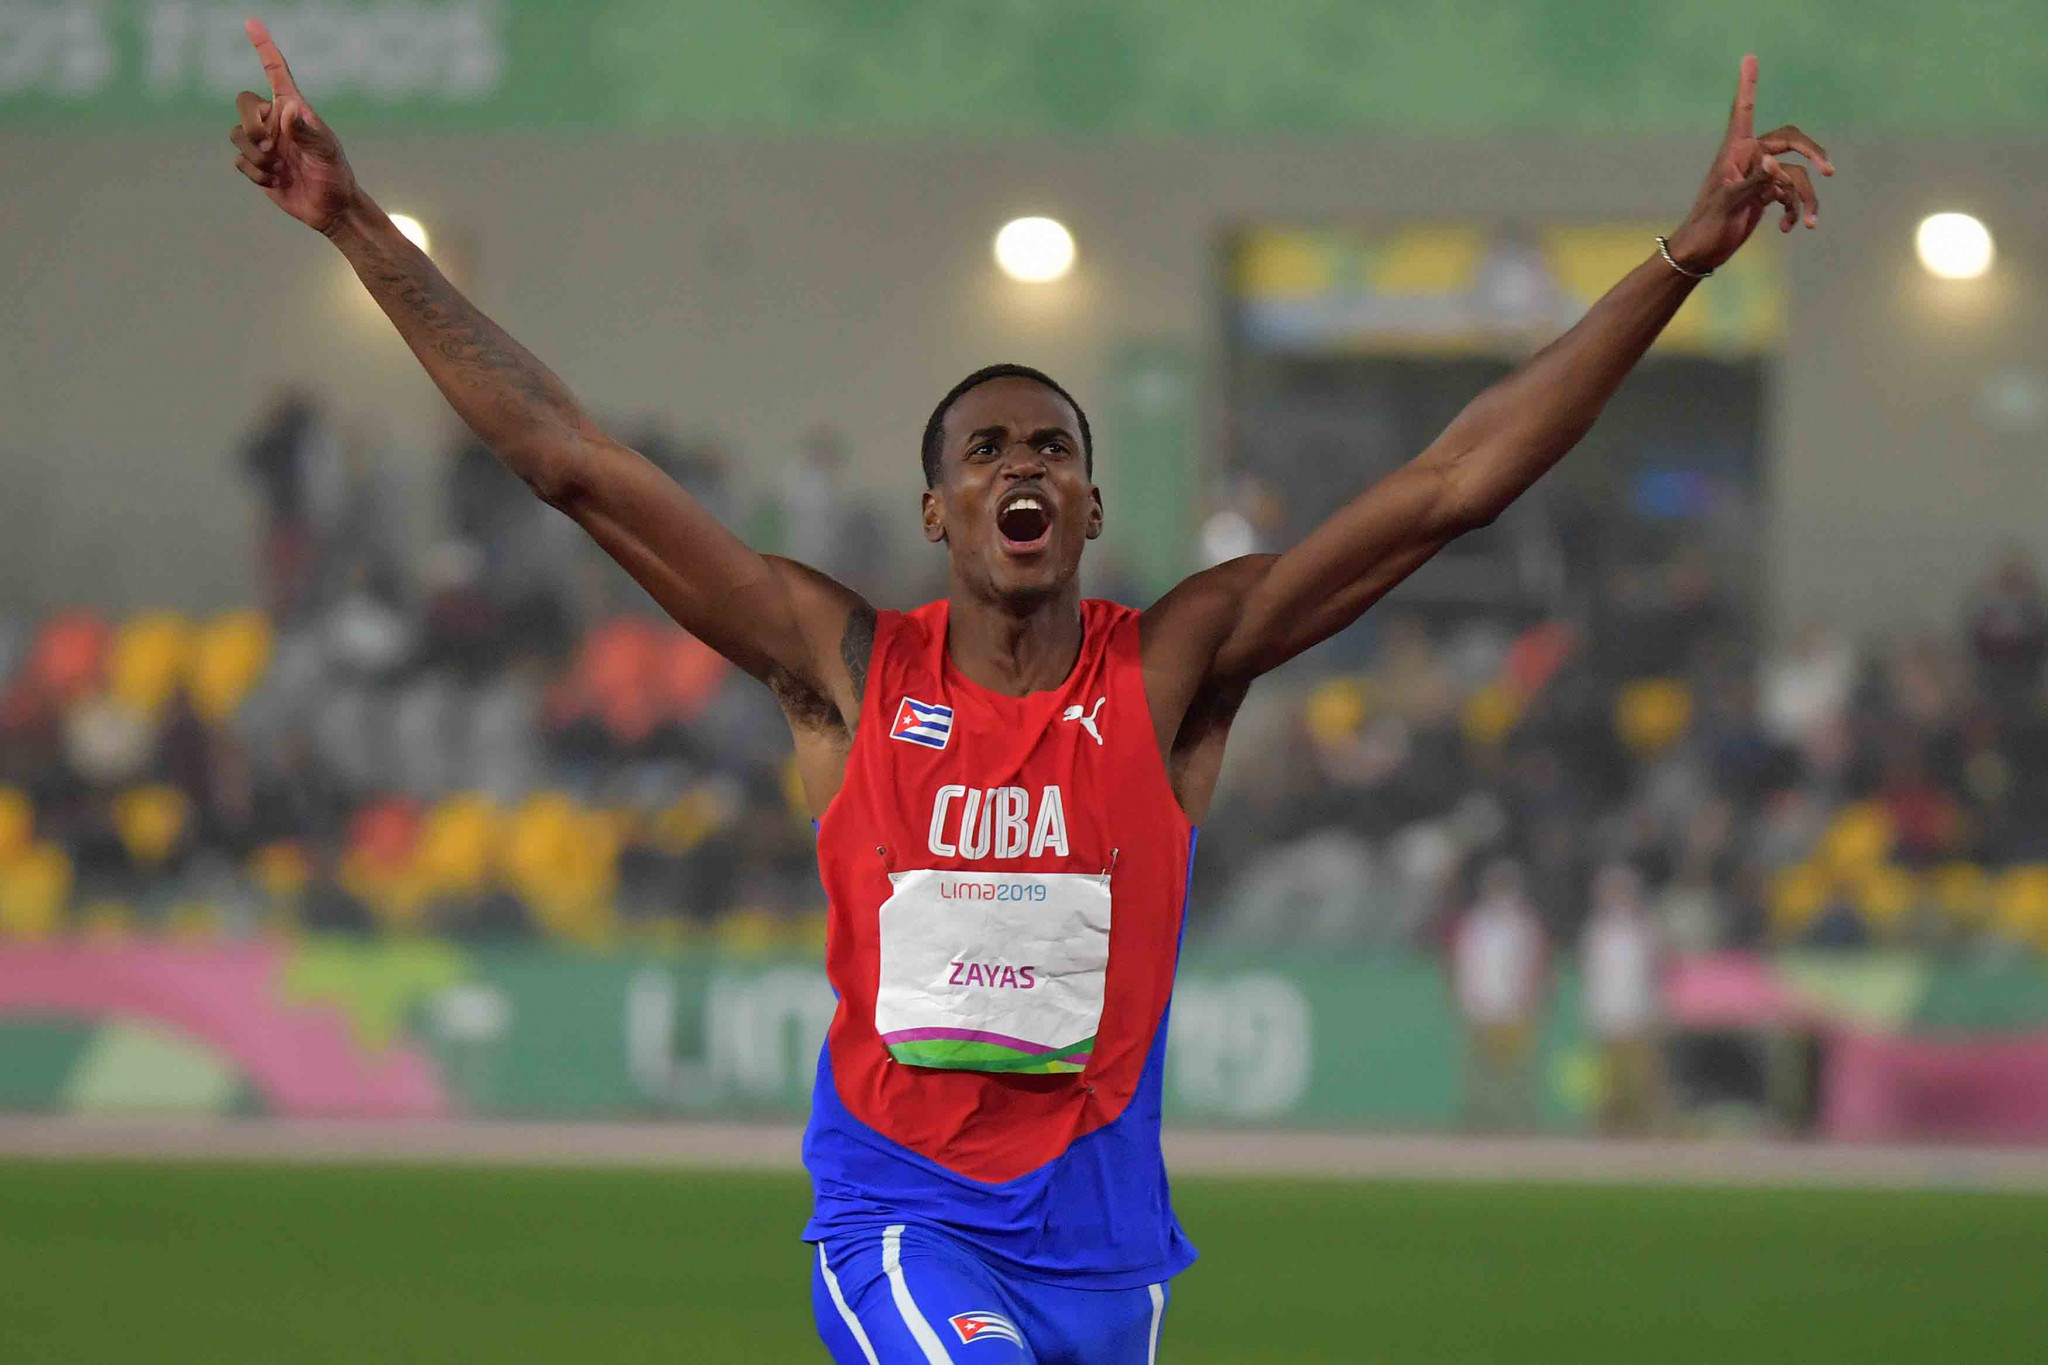 Cuba’s Luis Zayas won the men's high jump with a personal best effort ©Getty Images